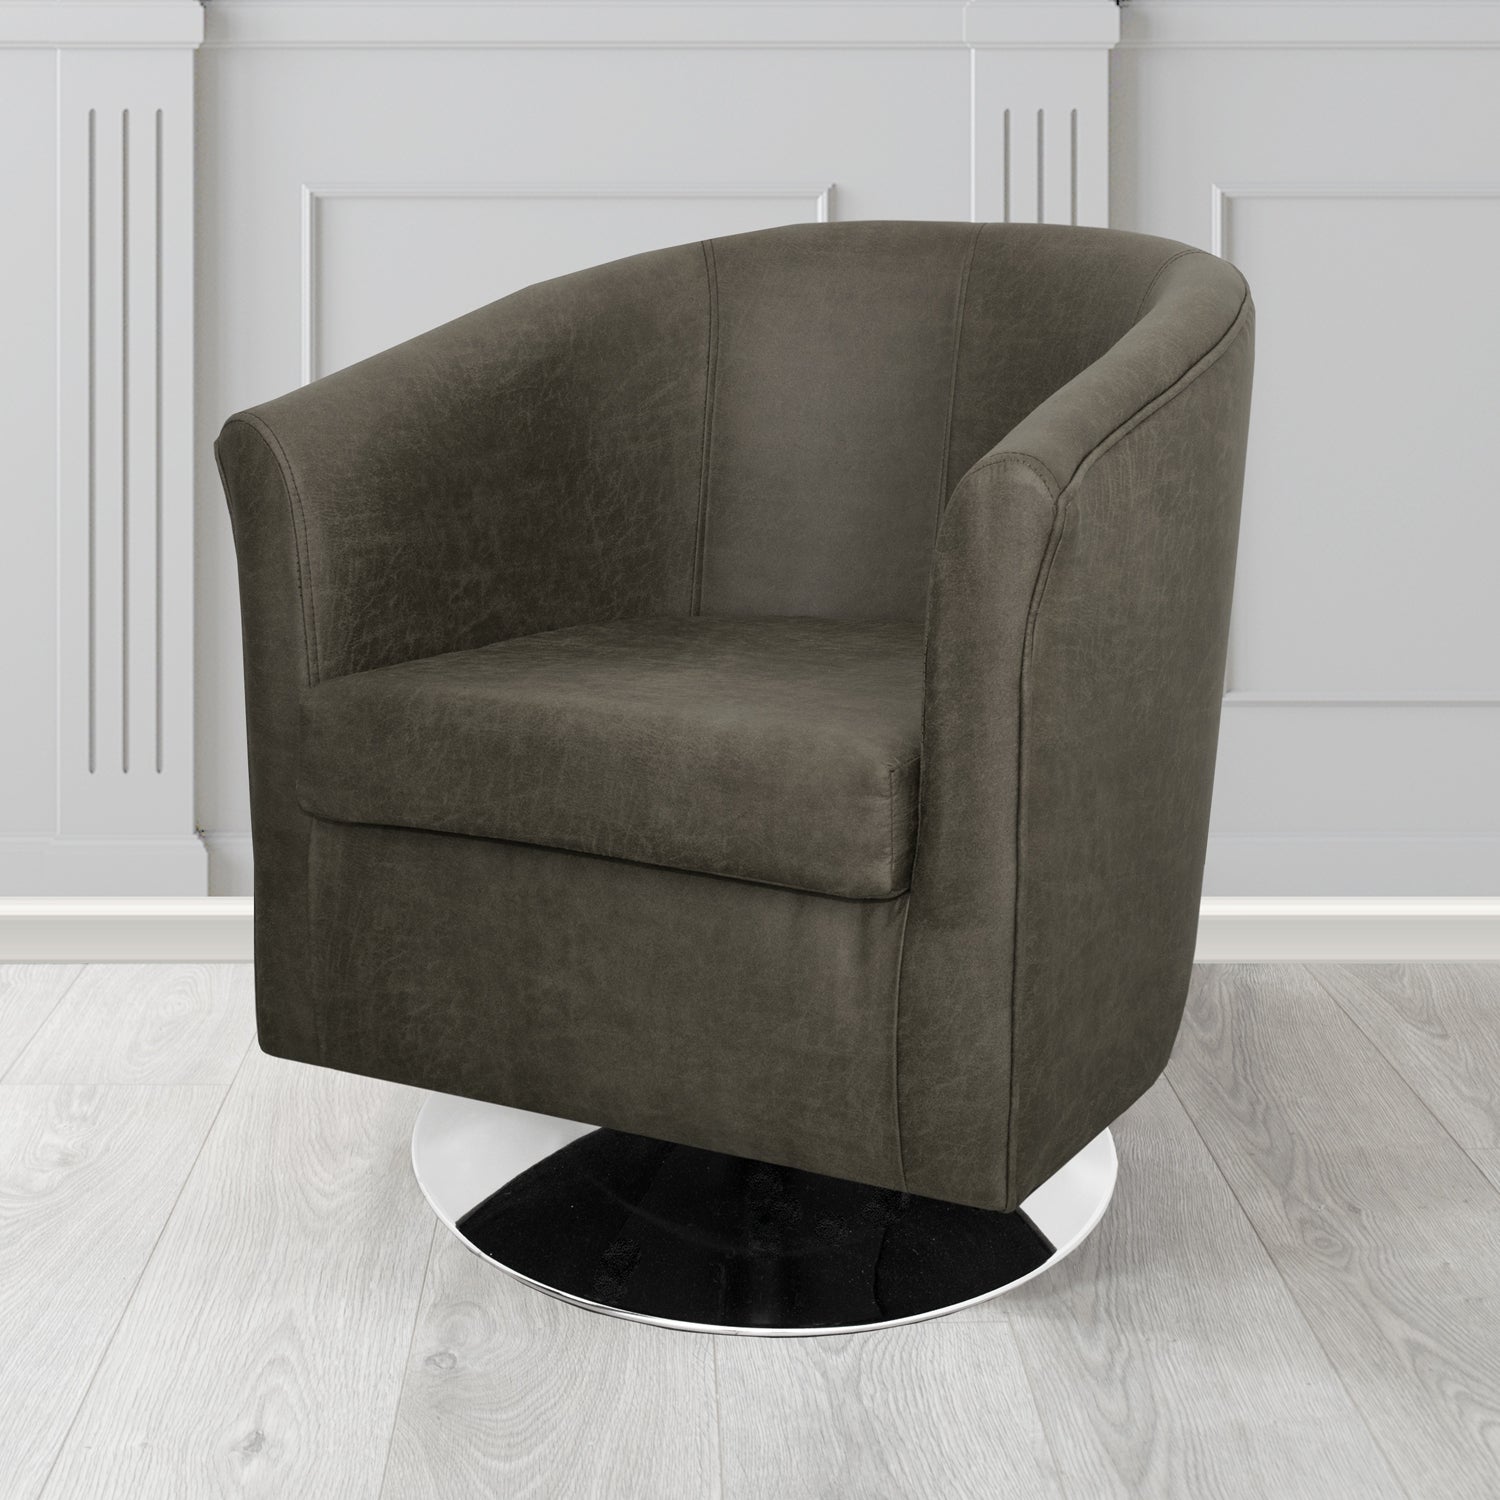 Tuscany Swivel Tub Chair in Nevada Charcoal Faux Leather - The Tub Chair Shop